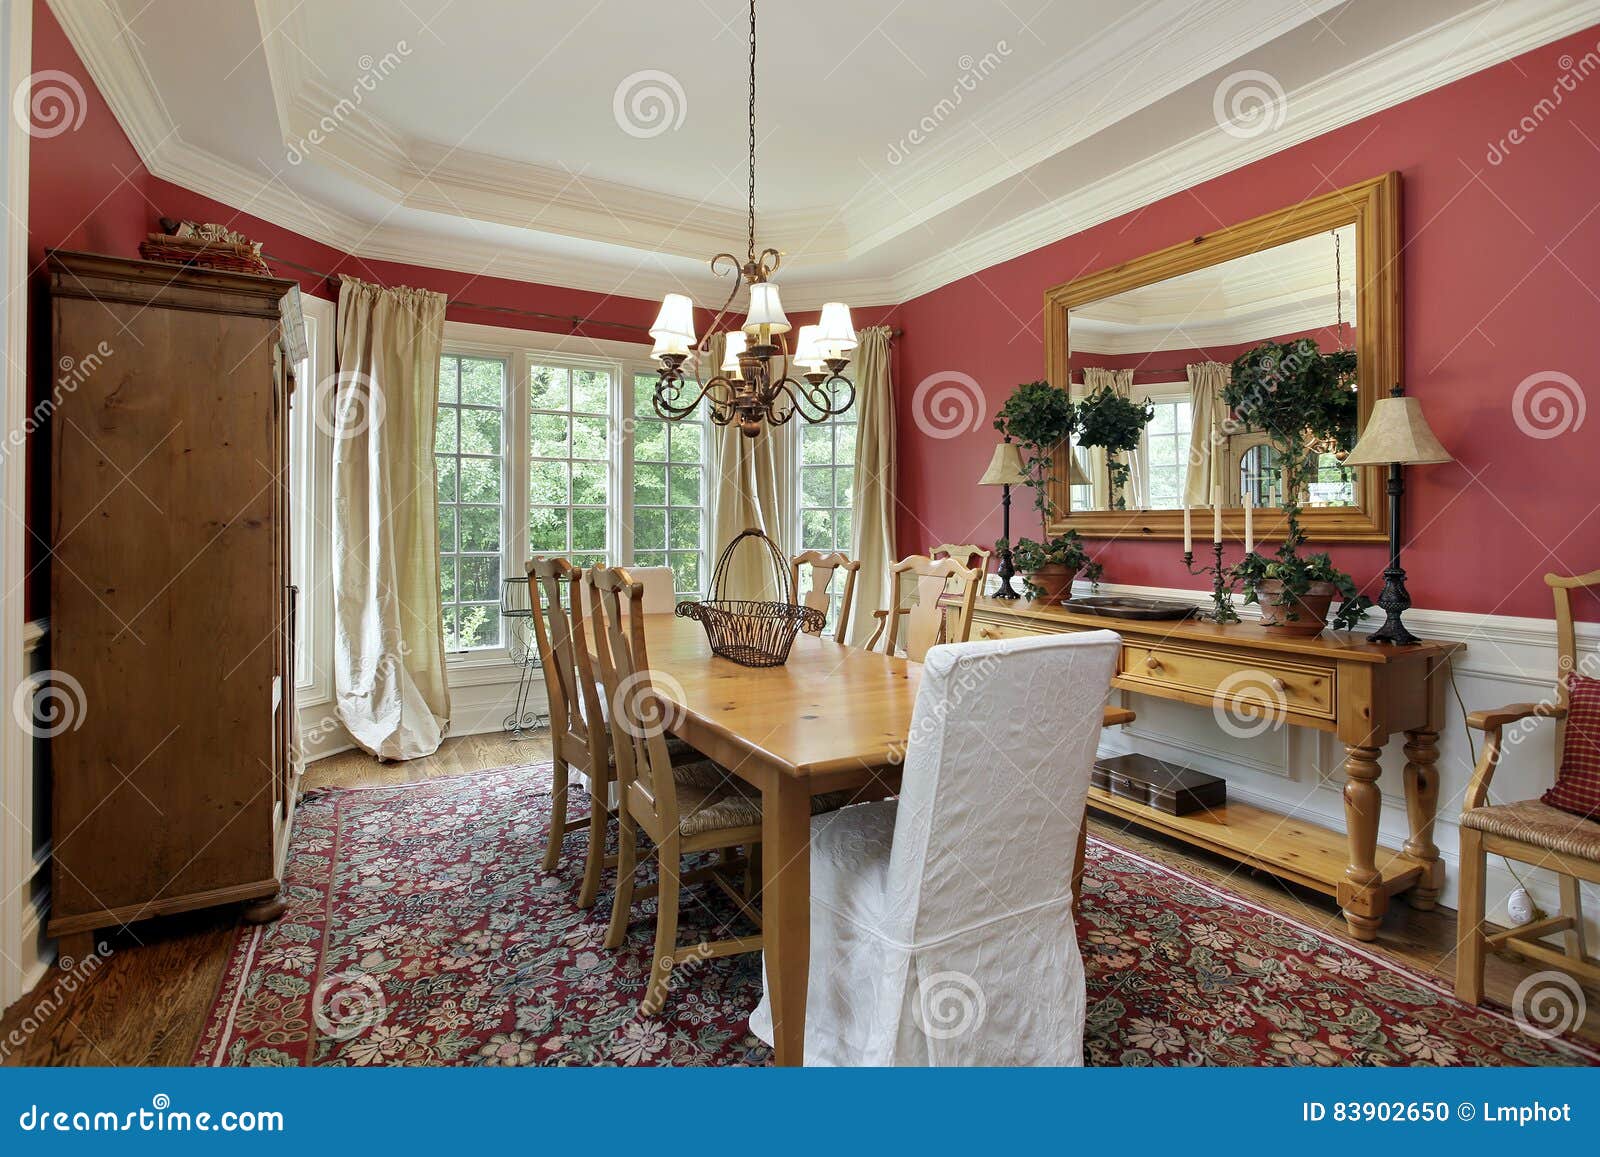 Dining room with red walls stock photo. Image of architecture - 83902650